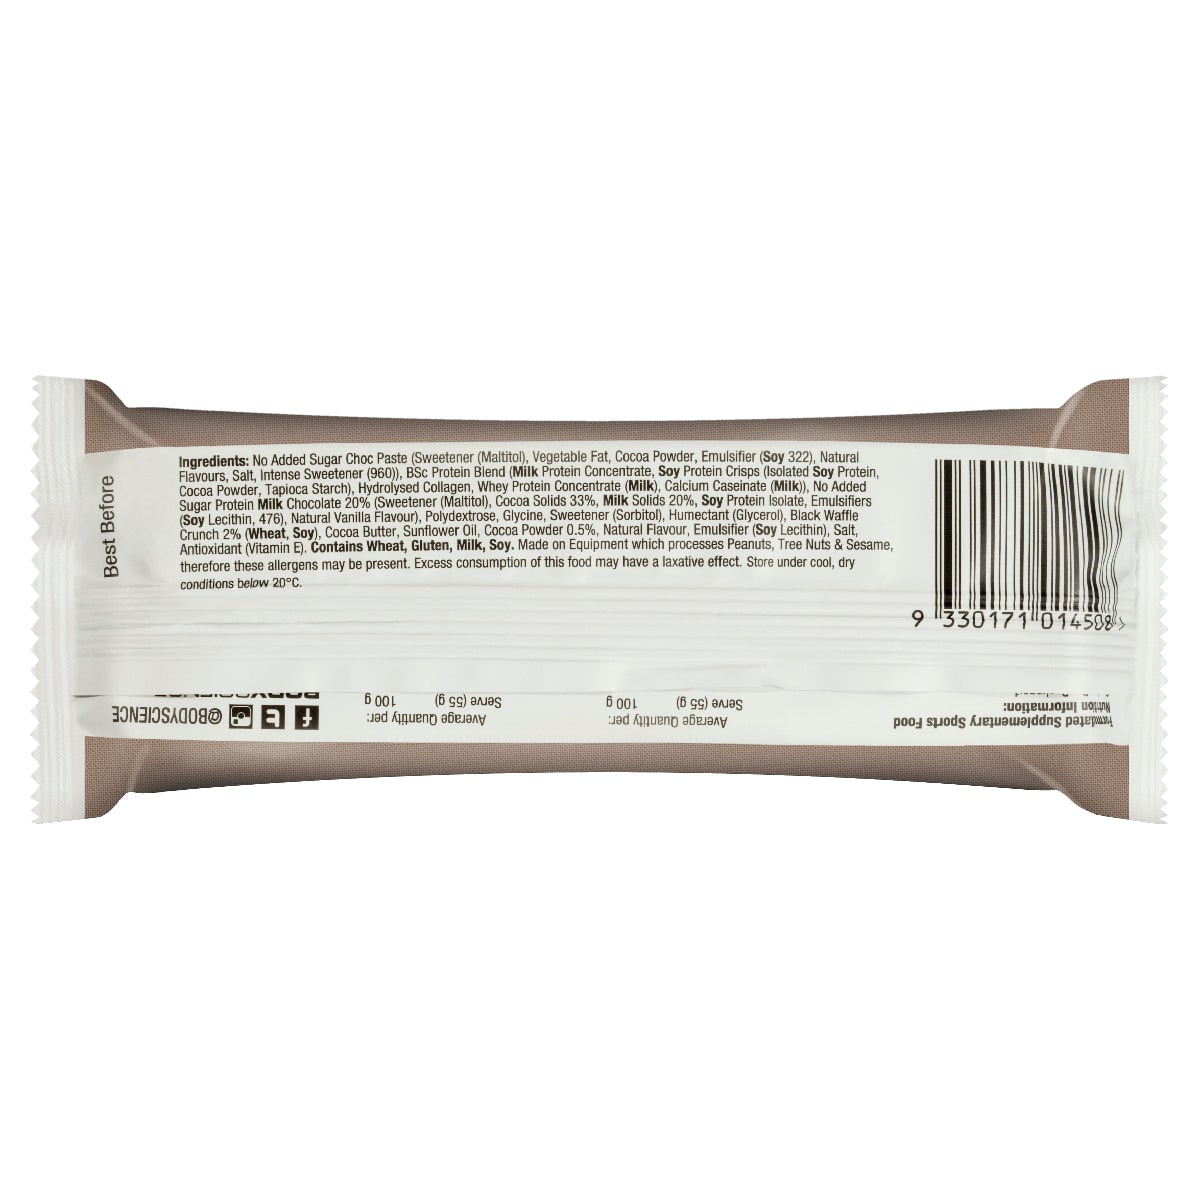 BSc Body Science High Protein Low Carb Mousse Bar Chocoholic 12 x 55g